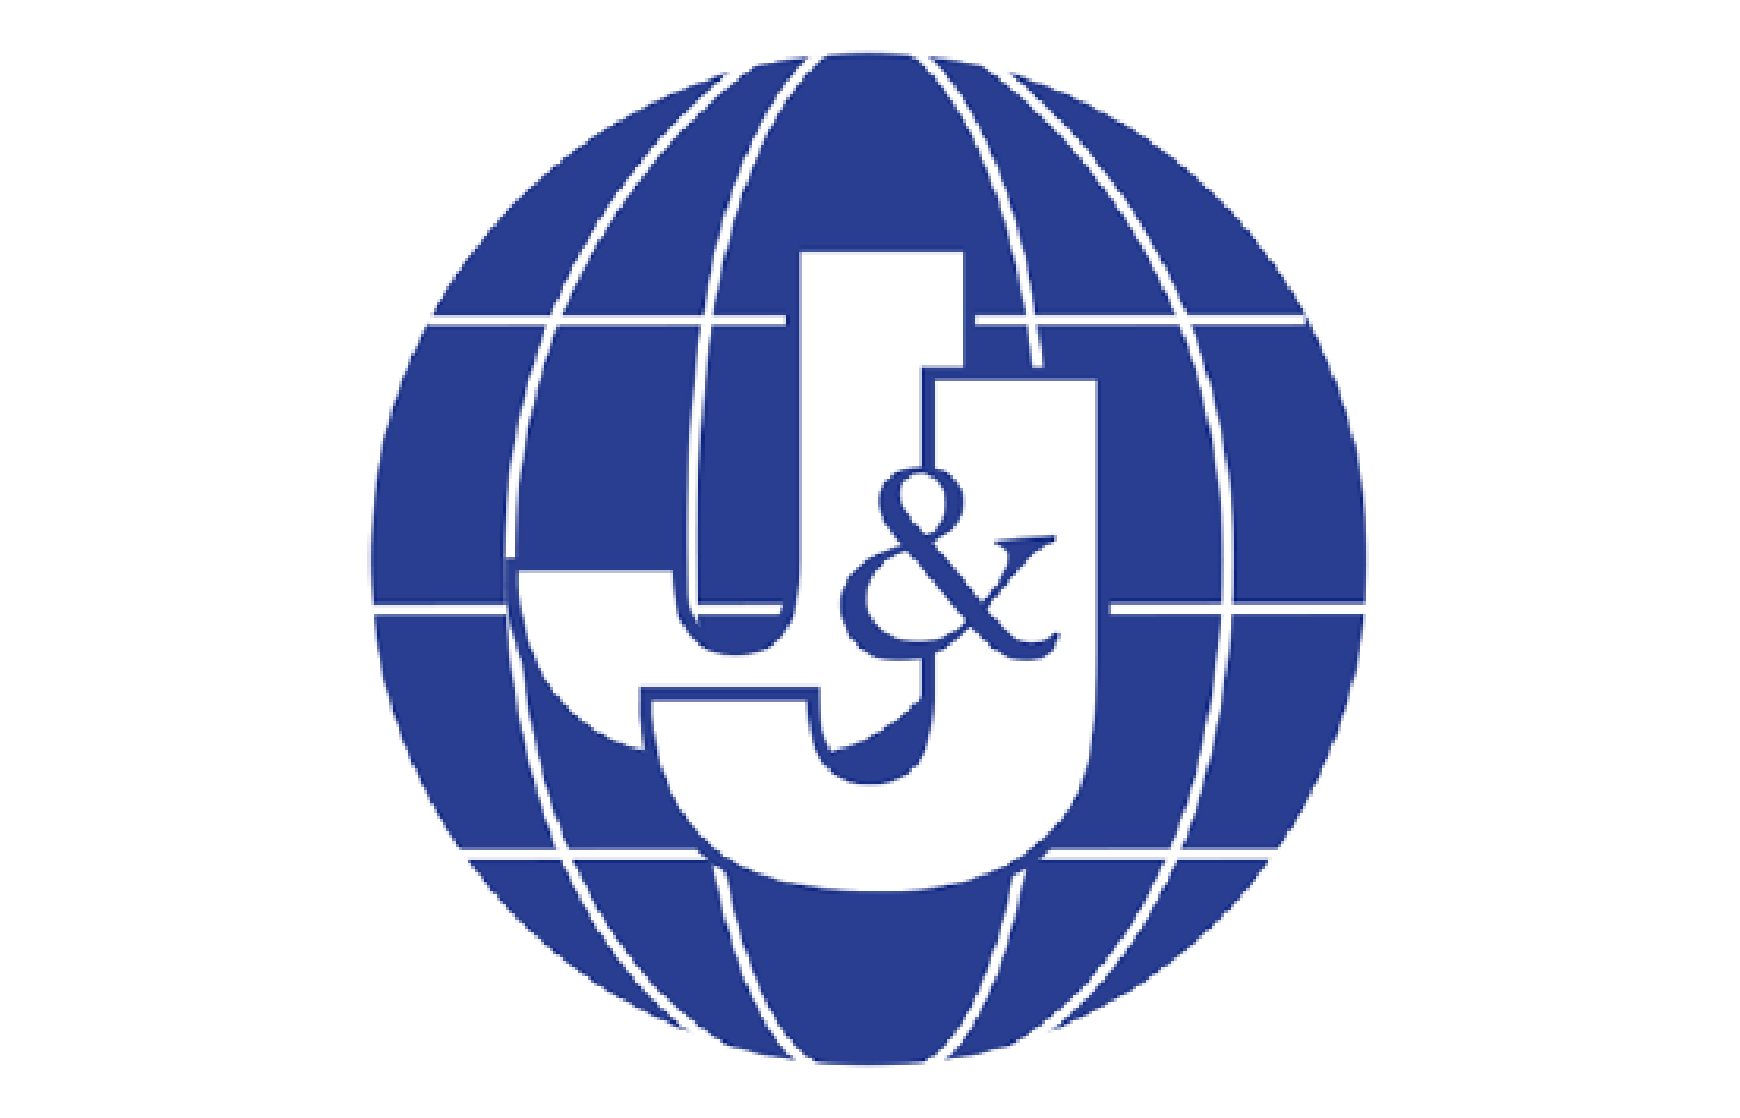 Logo of the company J&J Worldwide Services who is a client of Precision Talent Solutions.